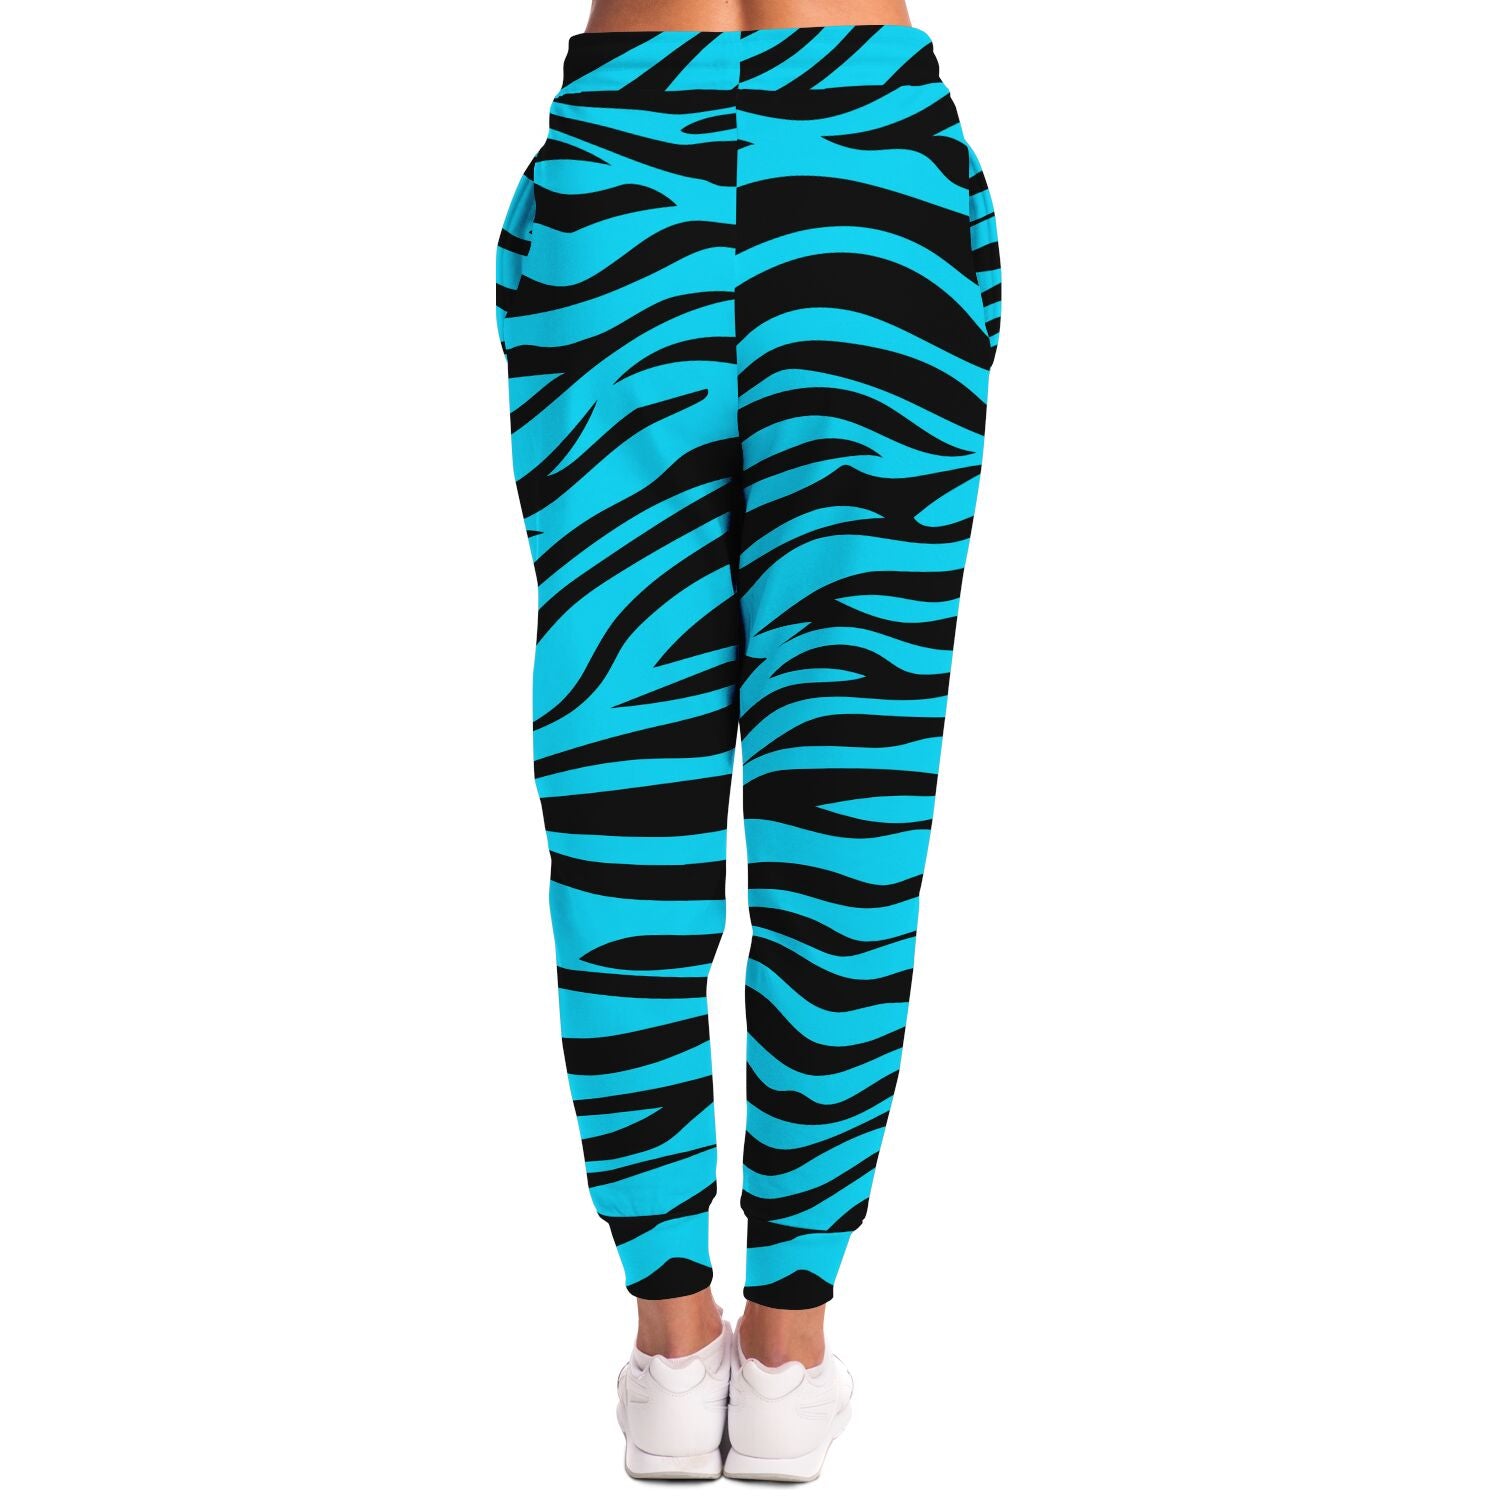 Blue Eye Of The Tiger Joggers